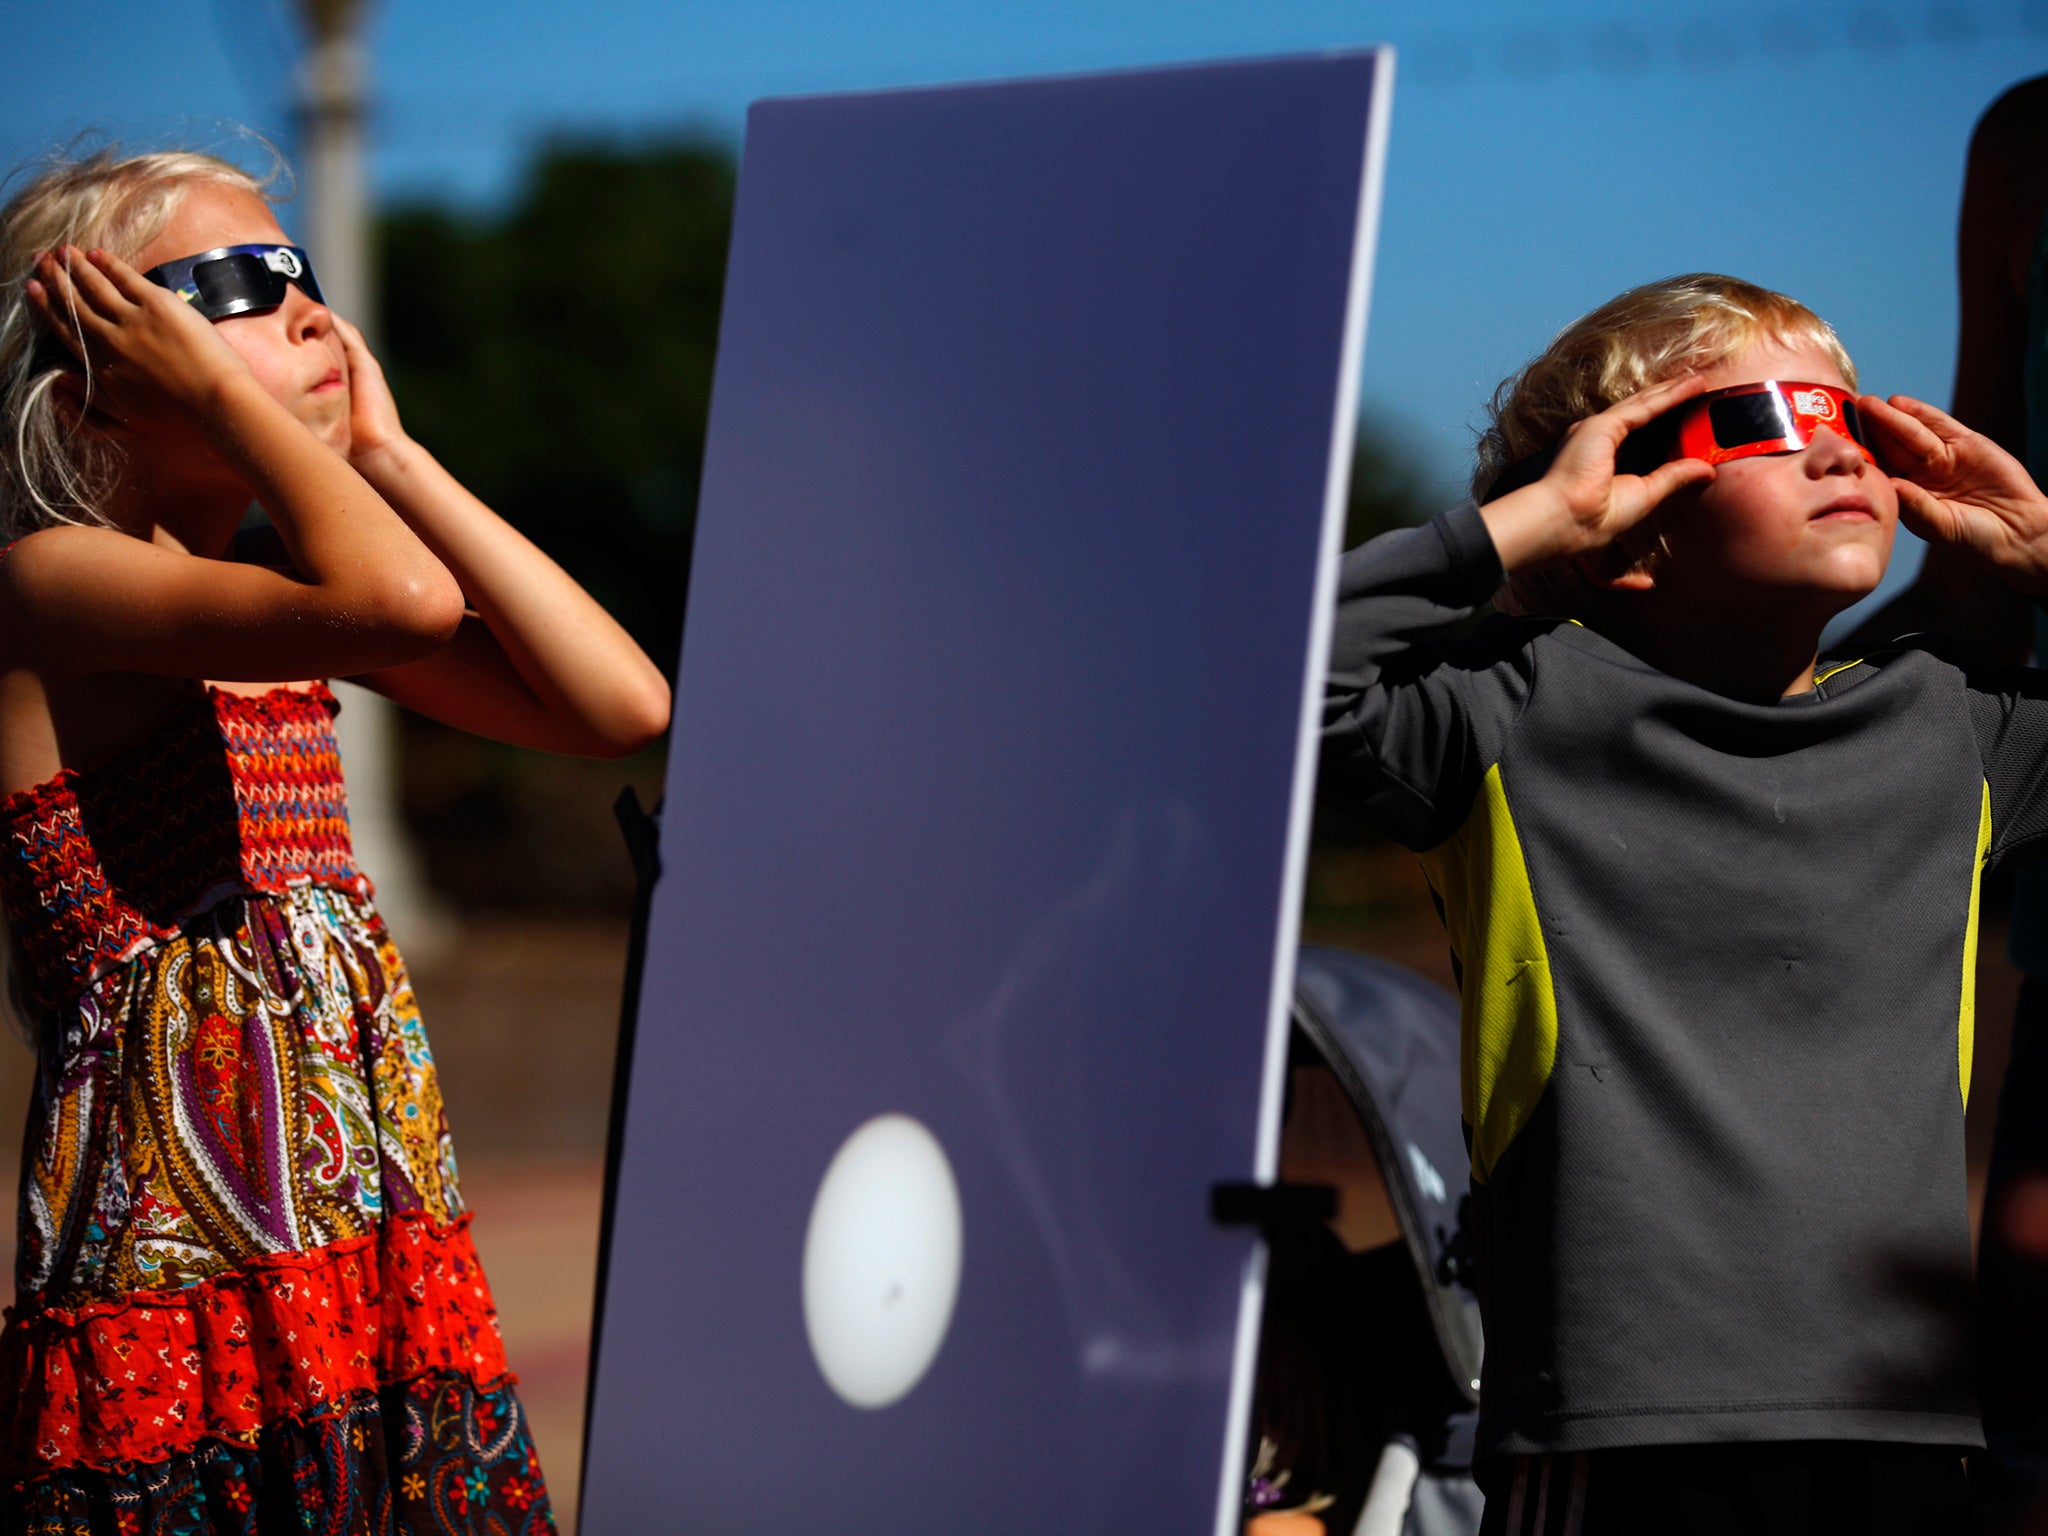 A reflected image of the sun is seen on a white board as kids look up to view the beginning a partial solar eclipse outside the Reuben H. Fleet Science Center in San Diego, California October 23, 2014